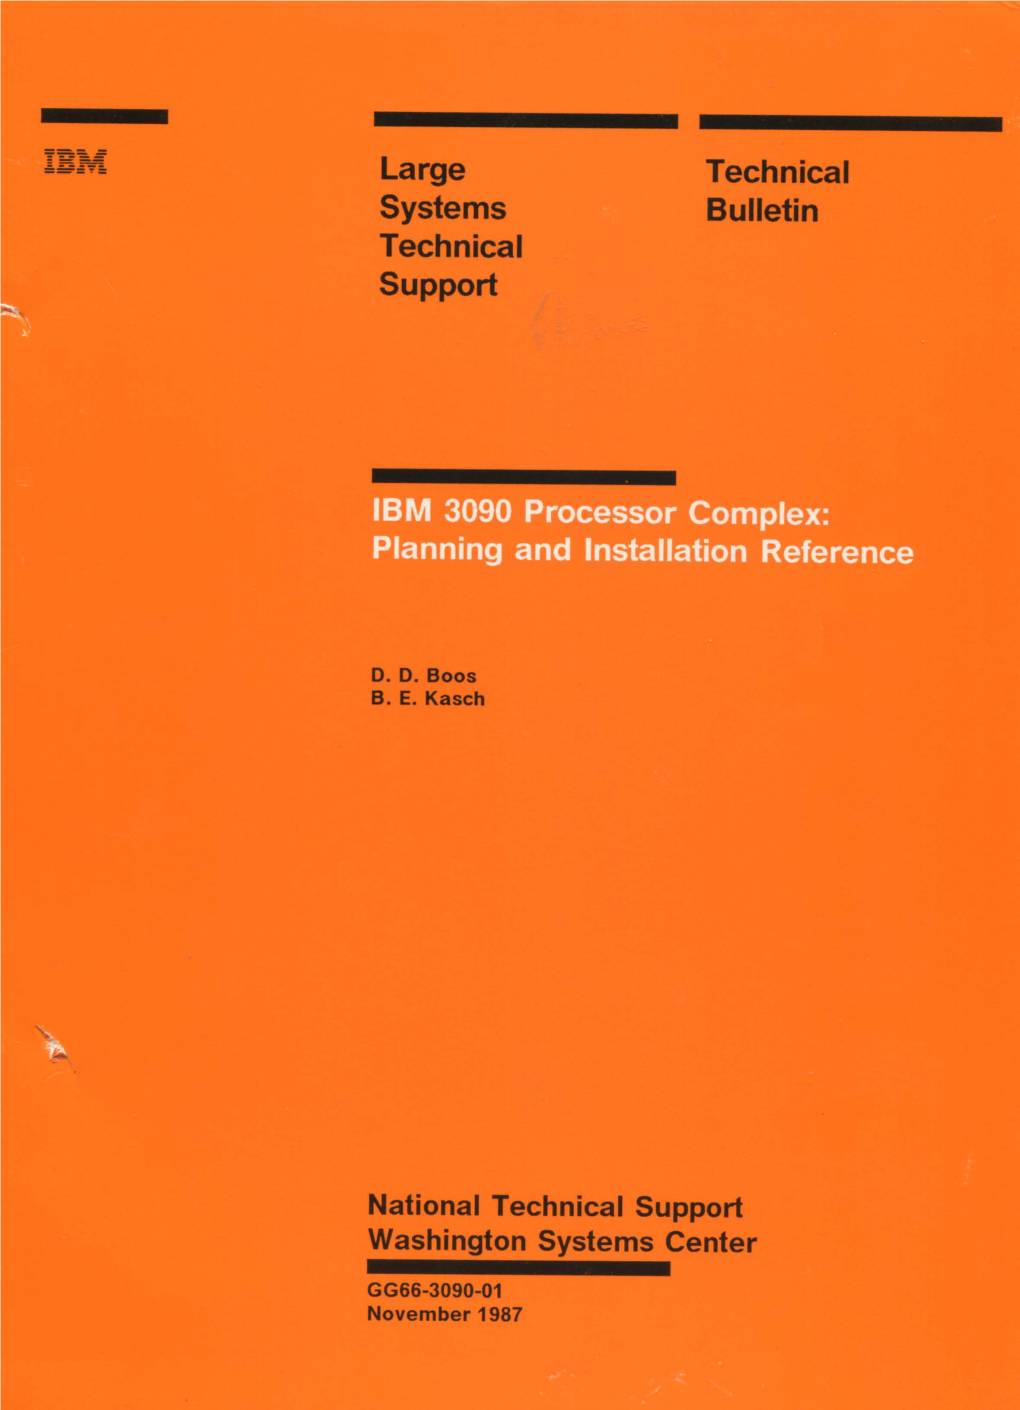 IBM 3090 Processor Complex: Planning and Installation Reference